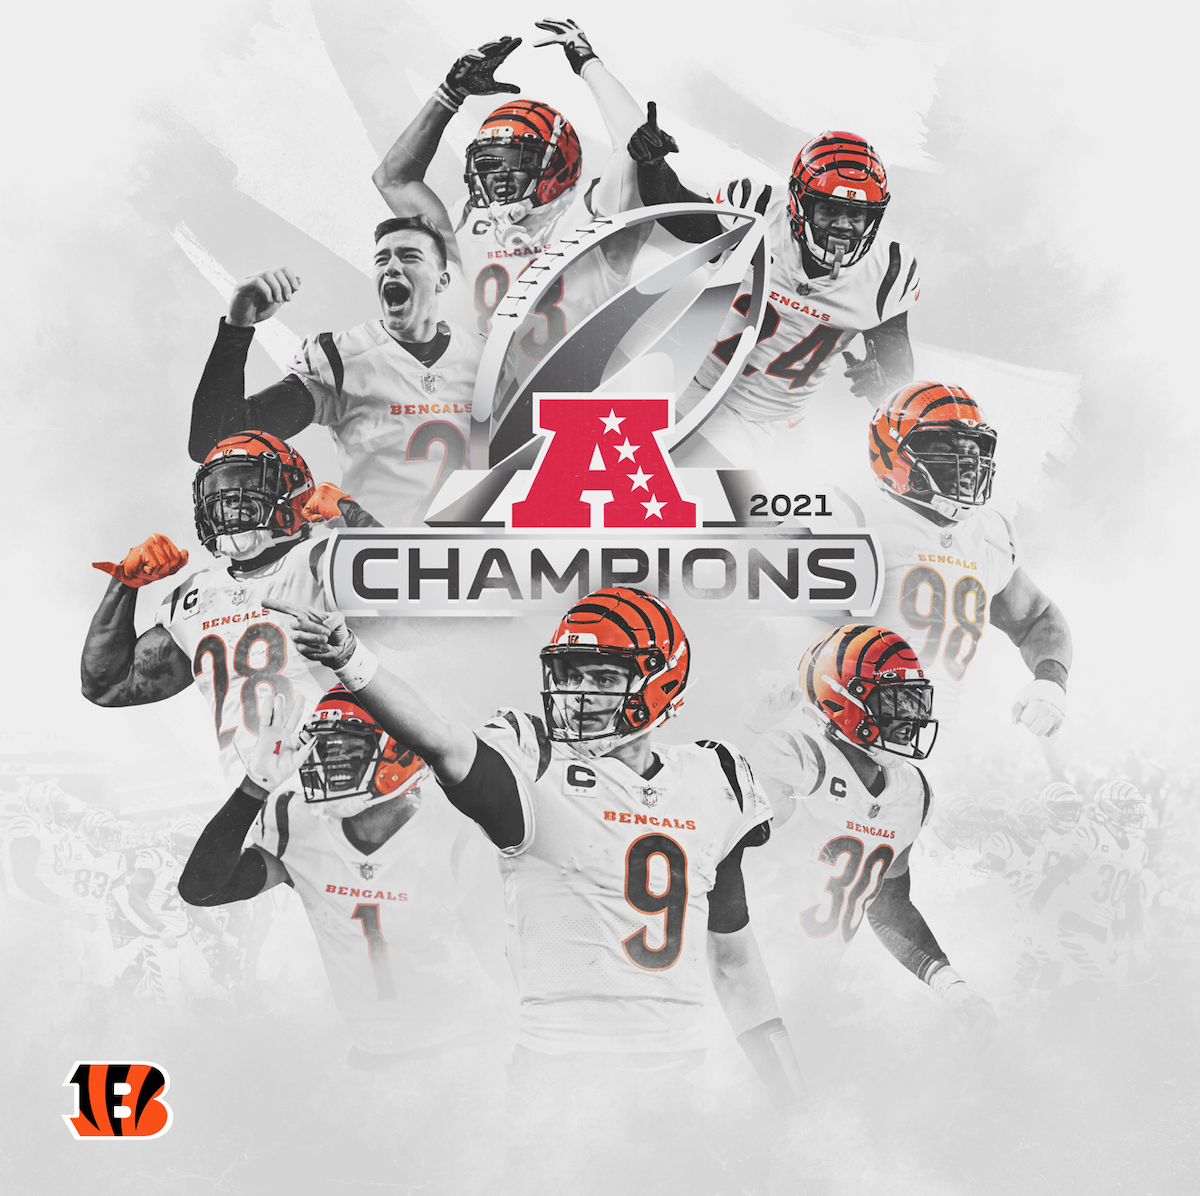 The Cincinnati Bengals Are Going to the Super Bowl, Baby!